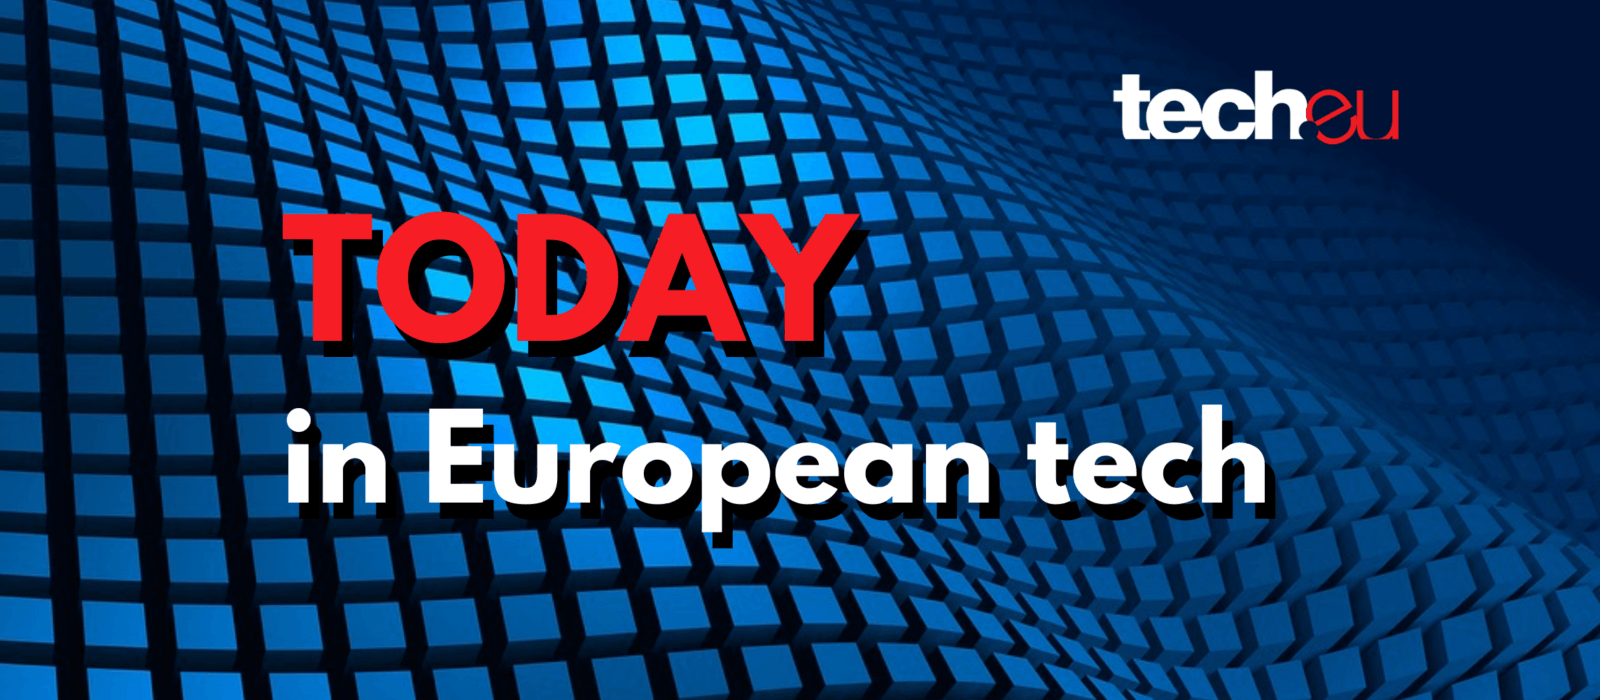 Today in European Tech: SAP in antitrust crosshairs, Spotify presents positive Q3 results, big rounds for Kodit and GetYourGuide, and more